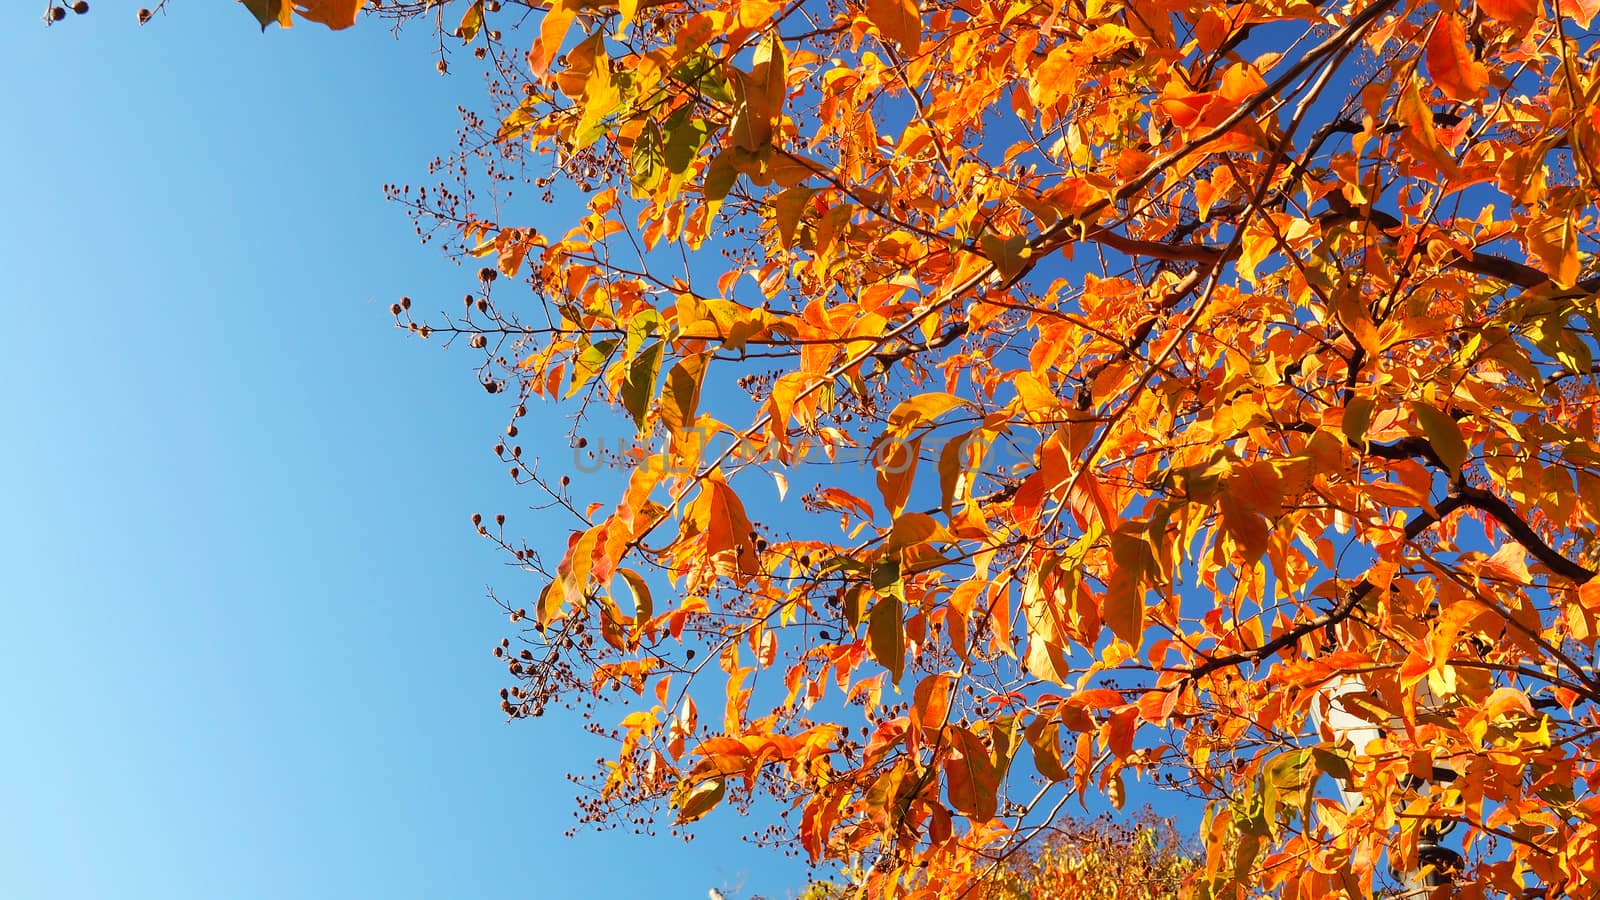 Autumn leaves and clear blue sky with yellow and red color.